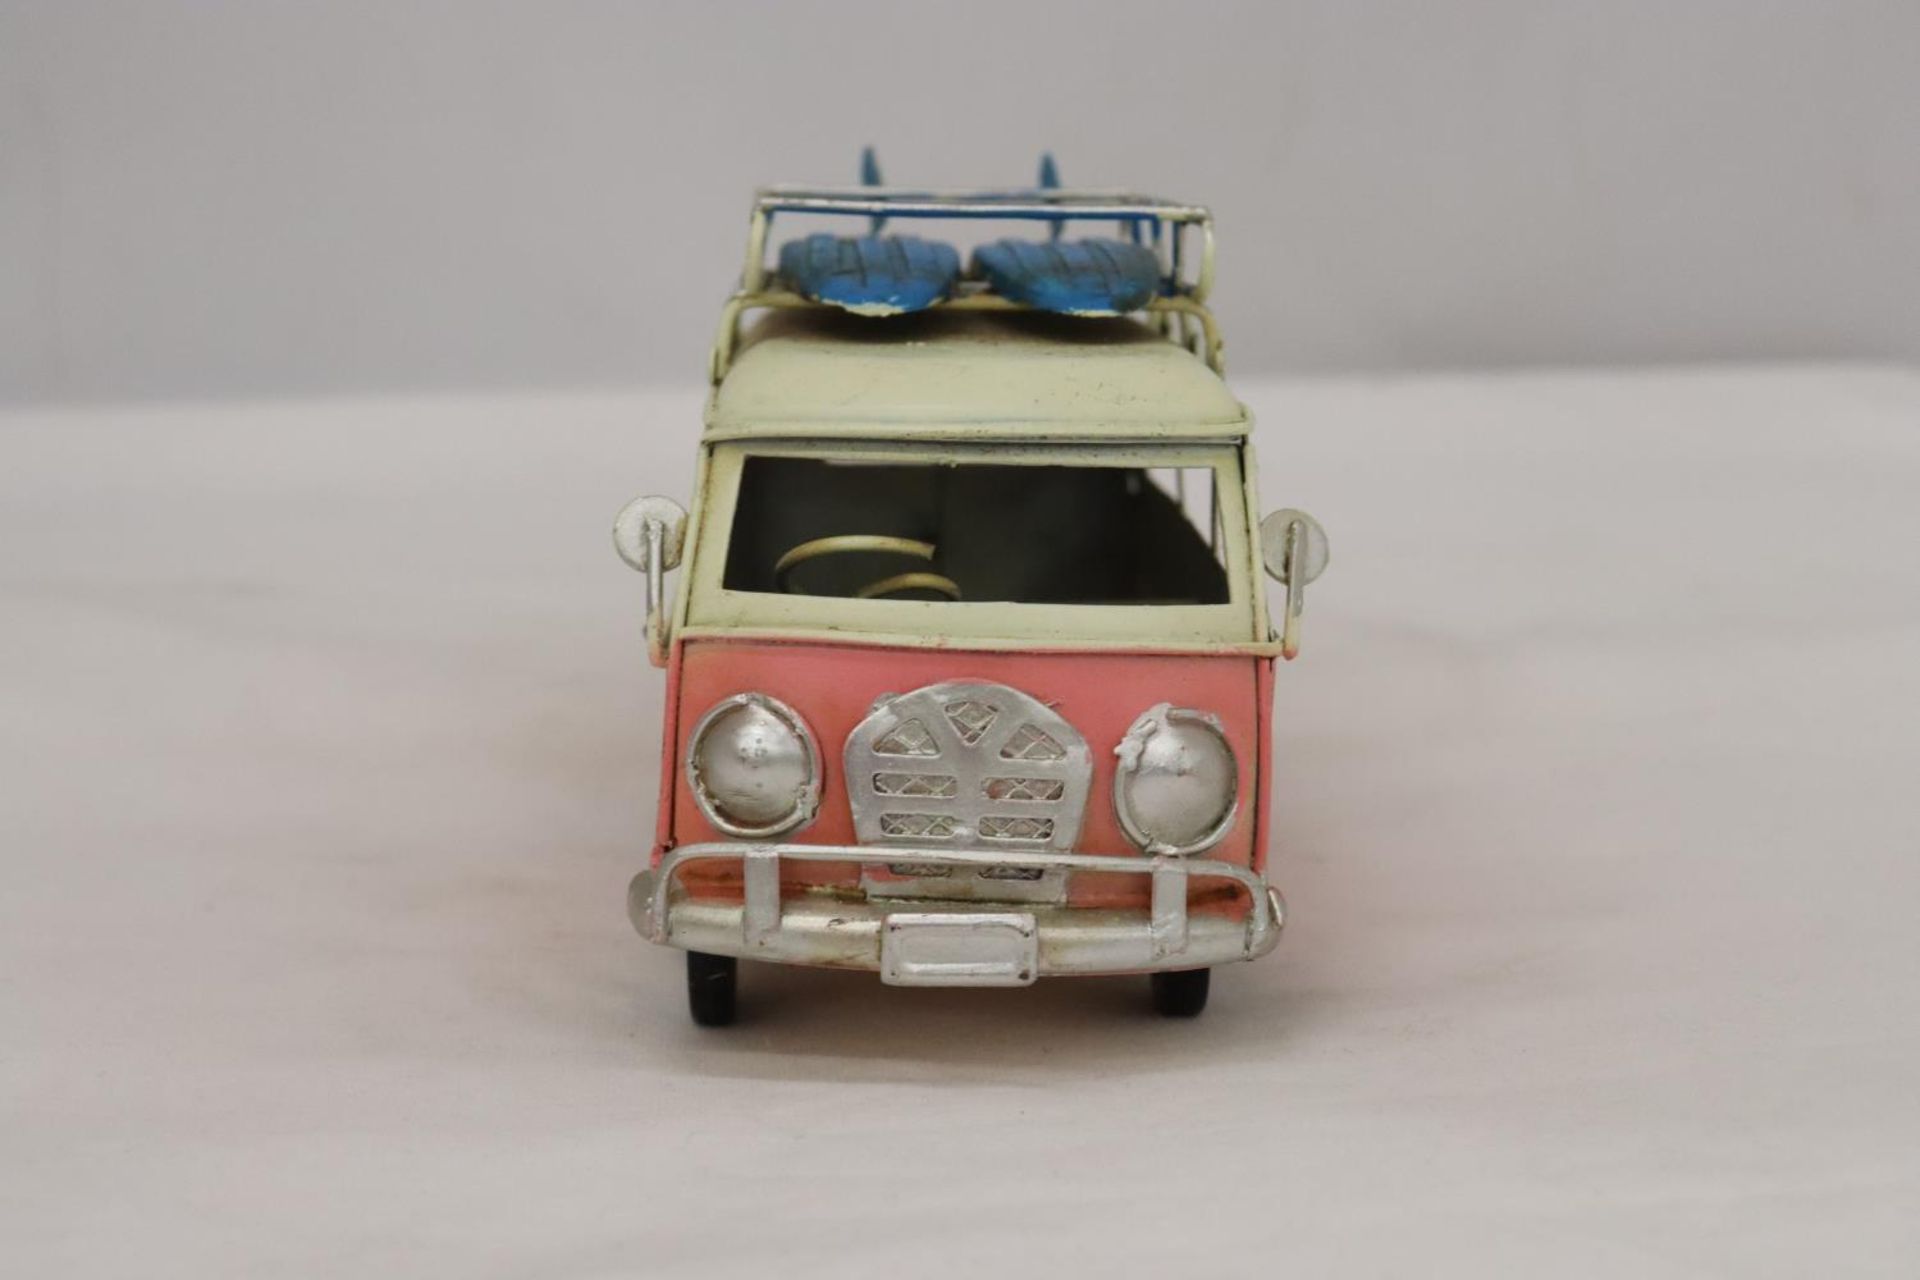 A TIN PLATE VOLKSWAGON SURFING CAMPER VAN - Image 5 of 6